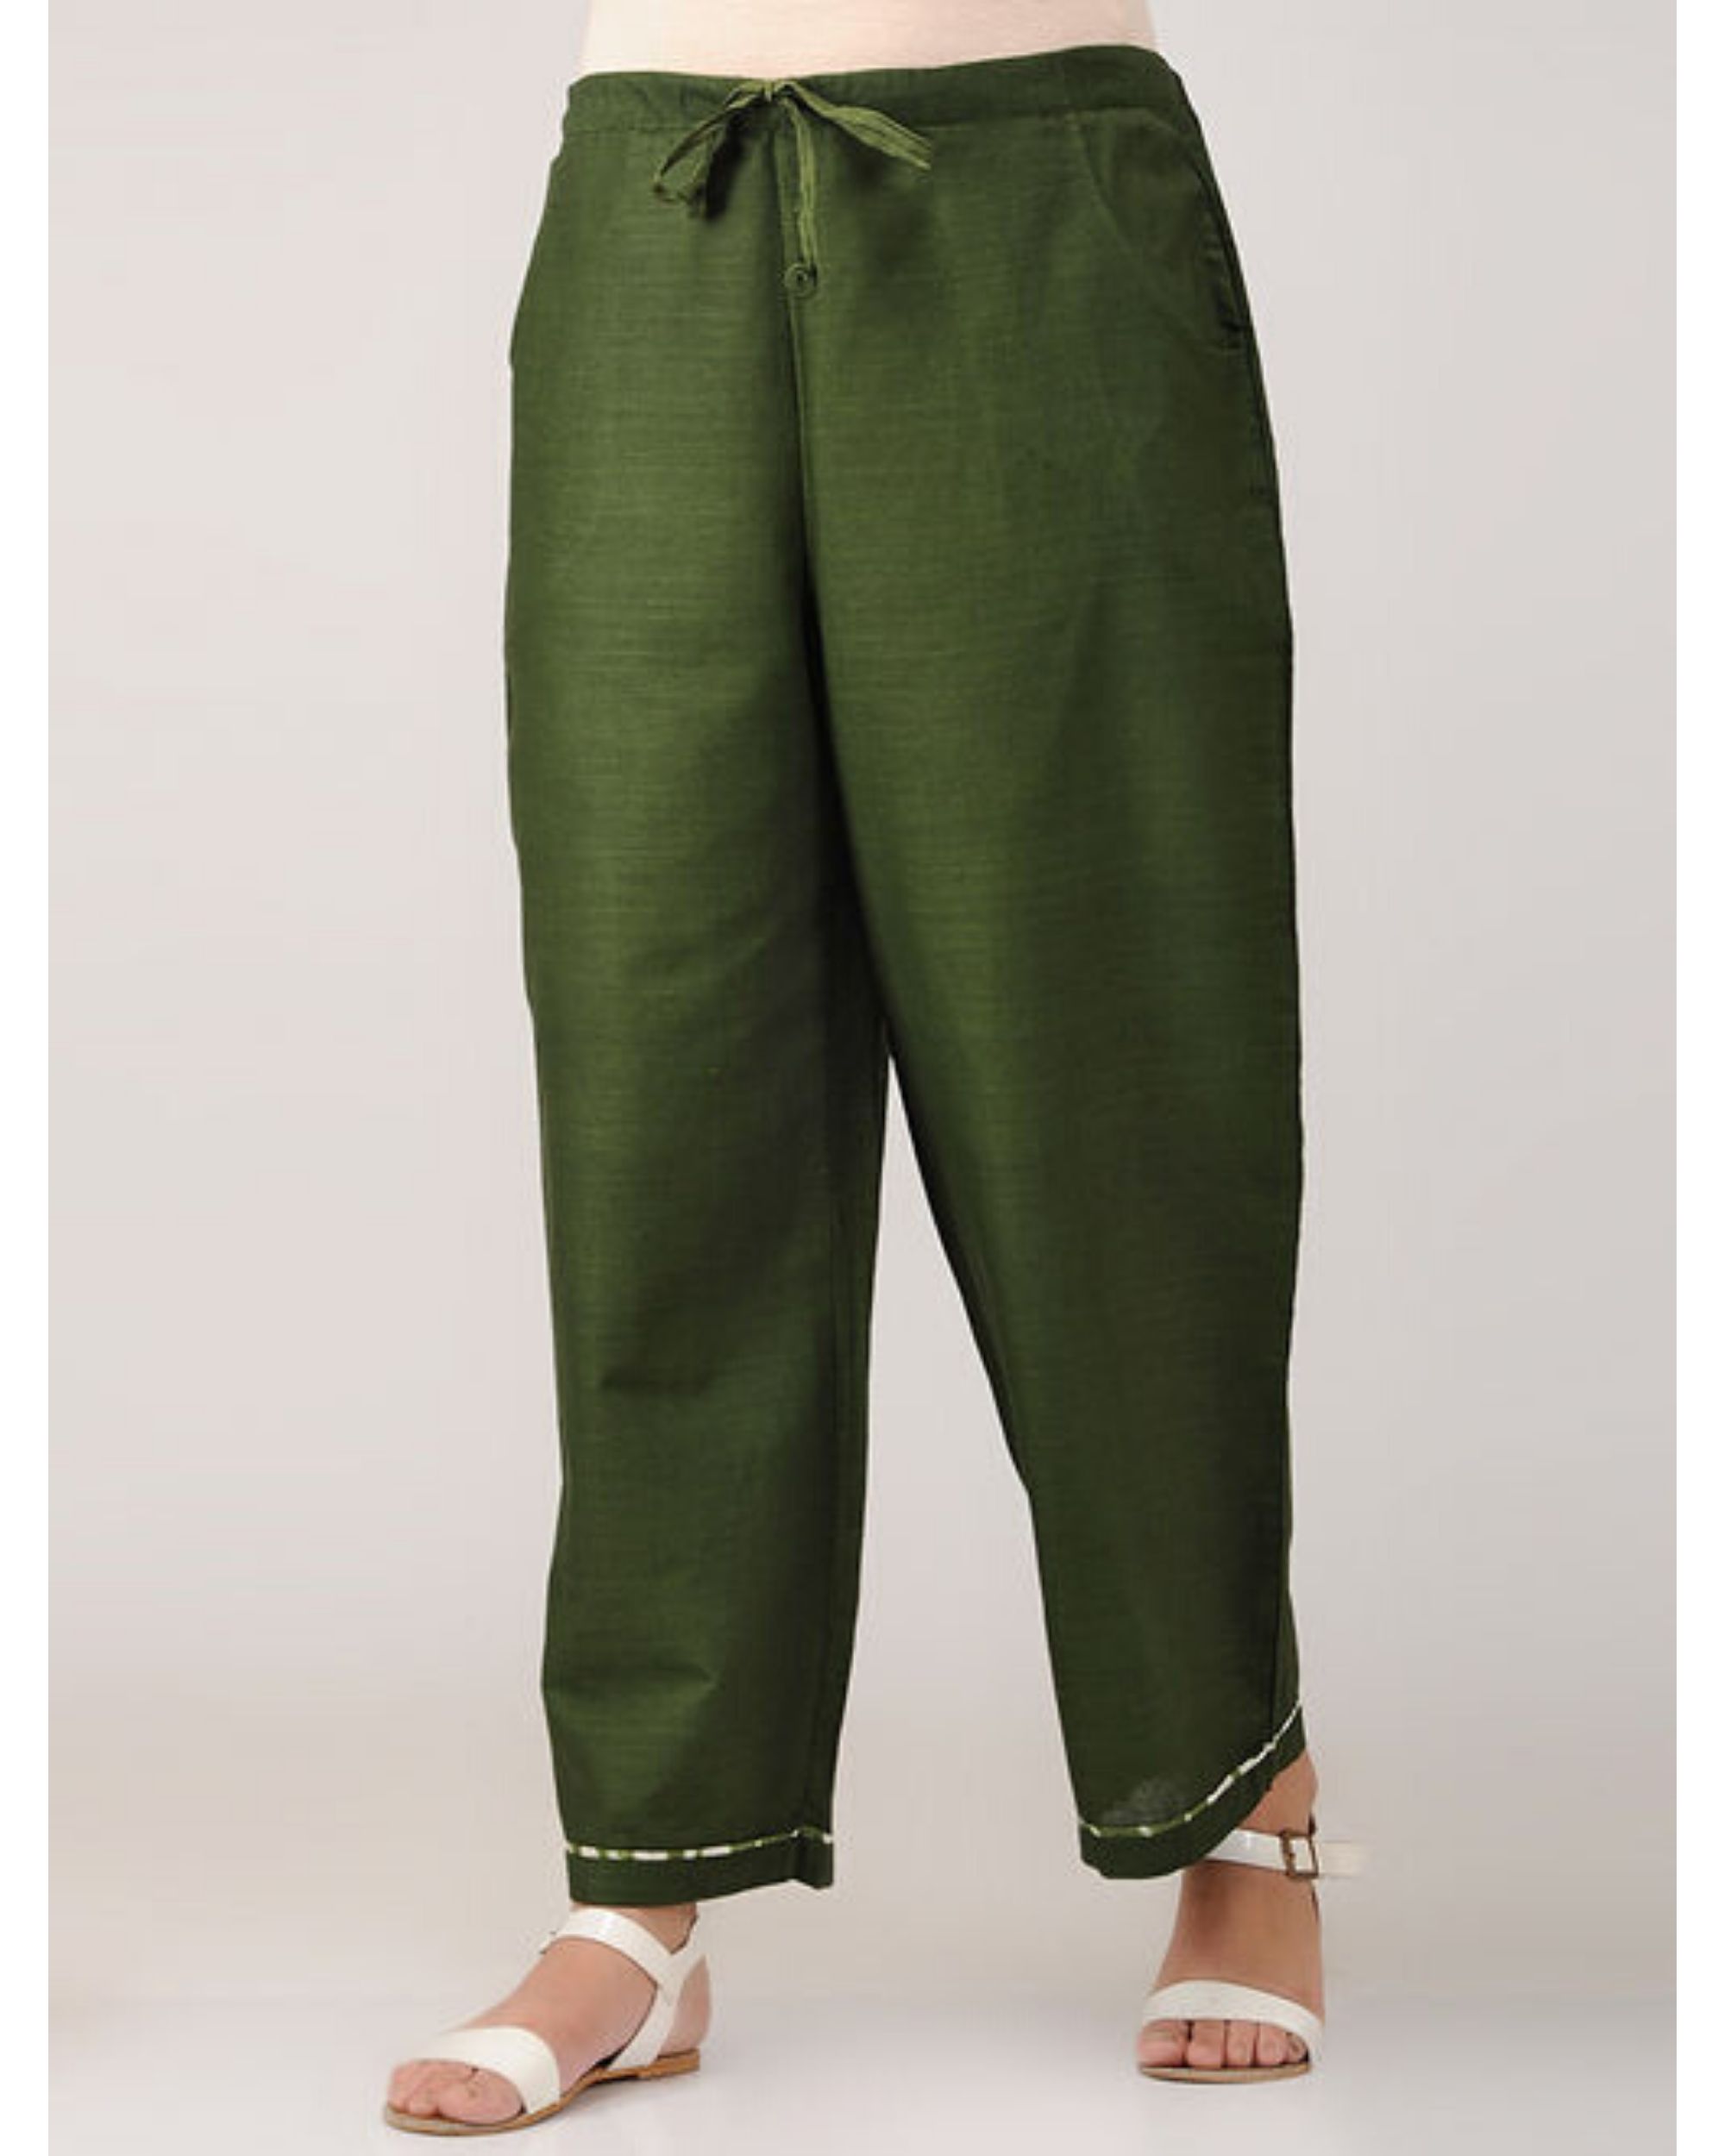 Olive green cotton pants with pockets by Sonal Kabra | The Secret Label